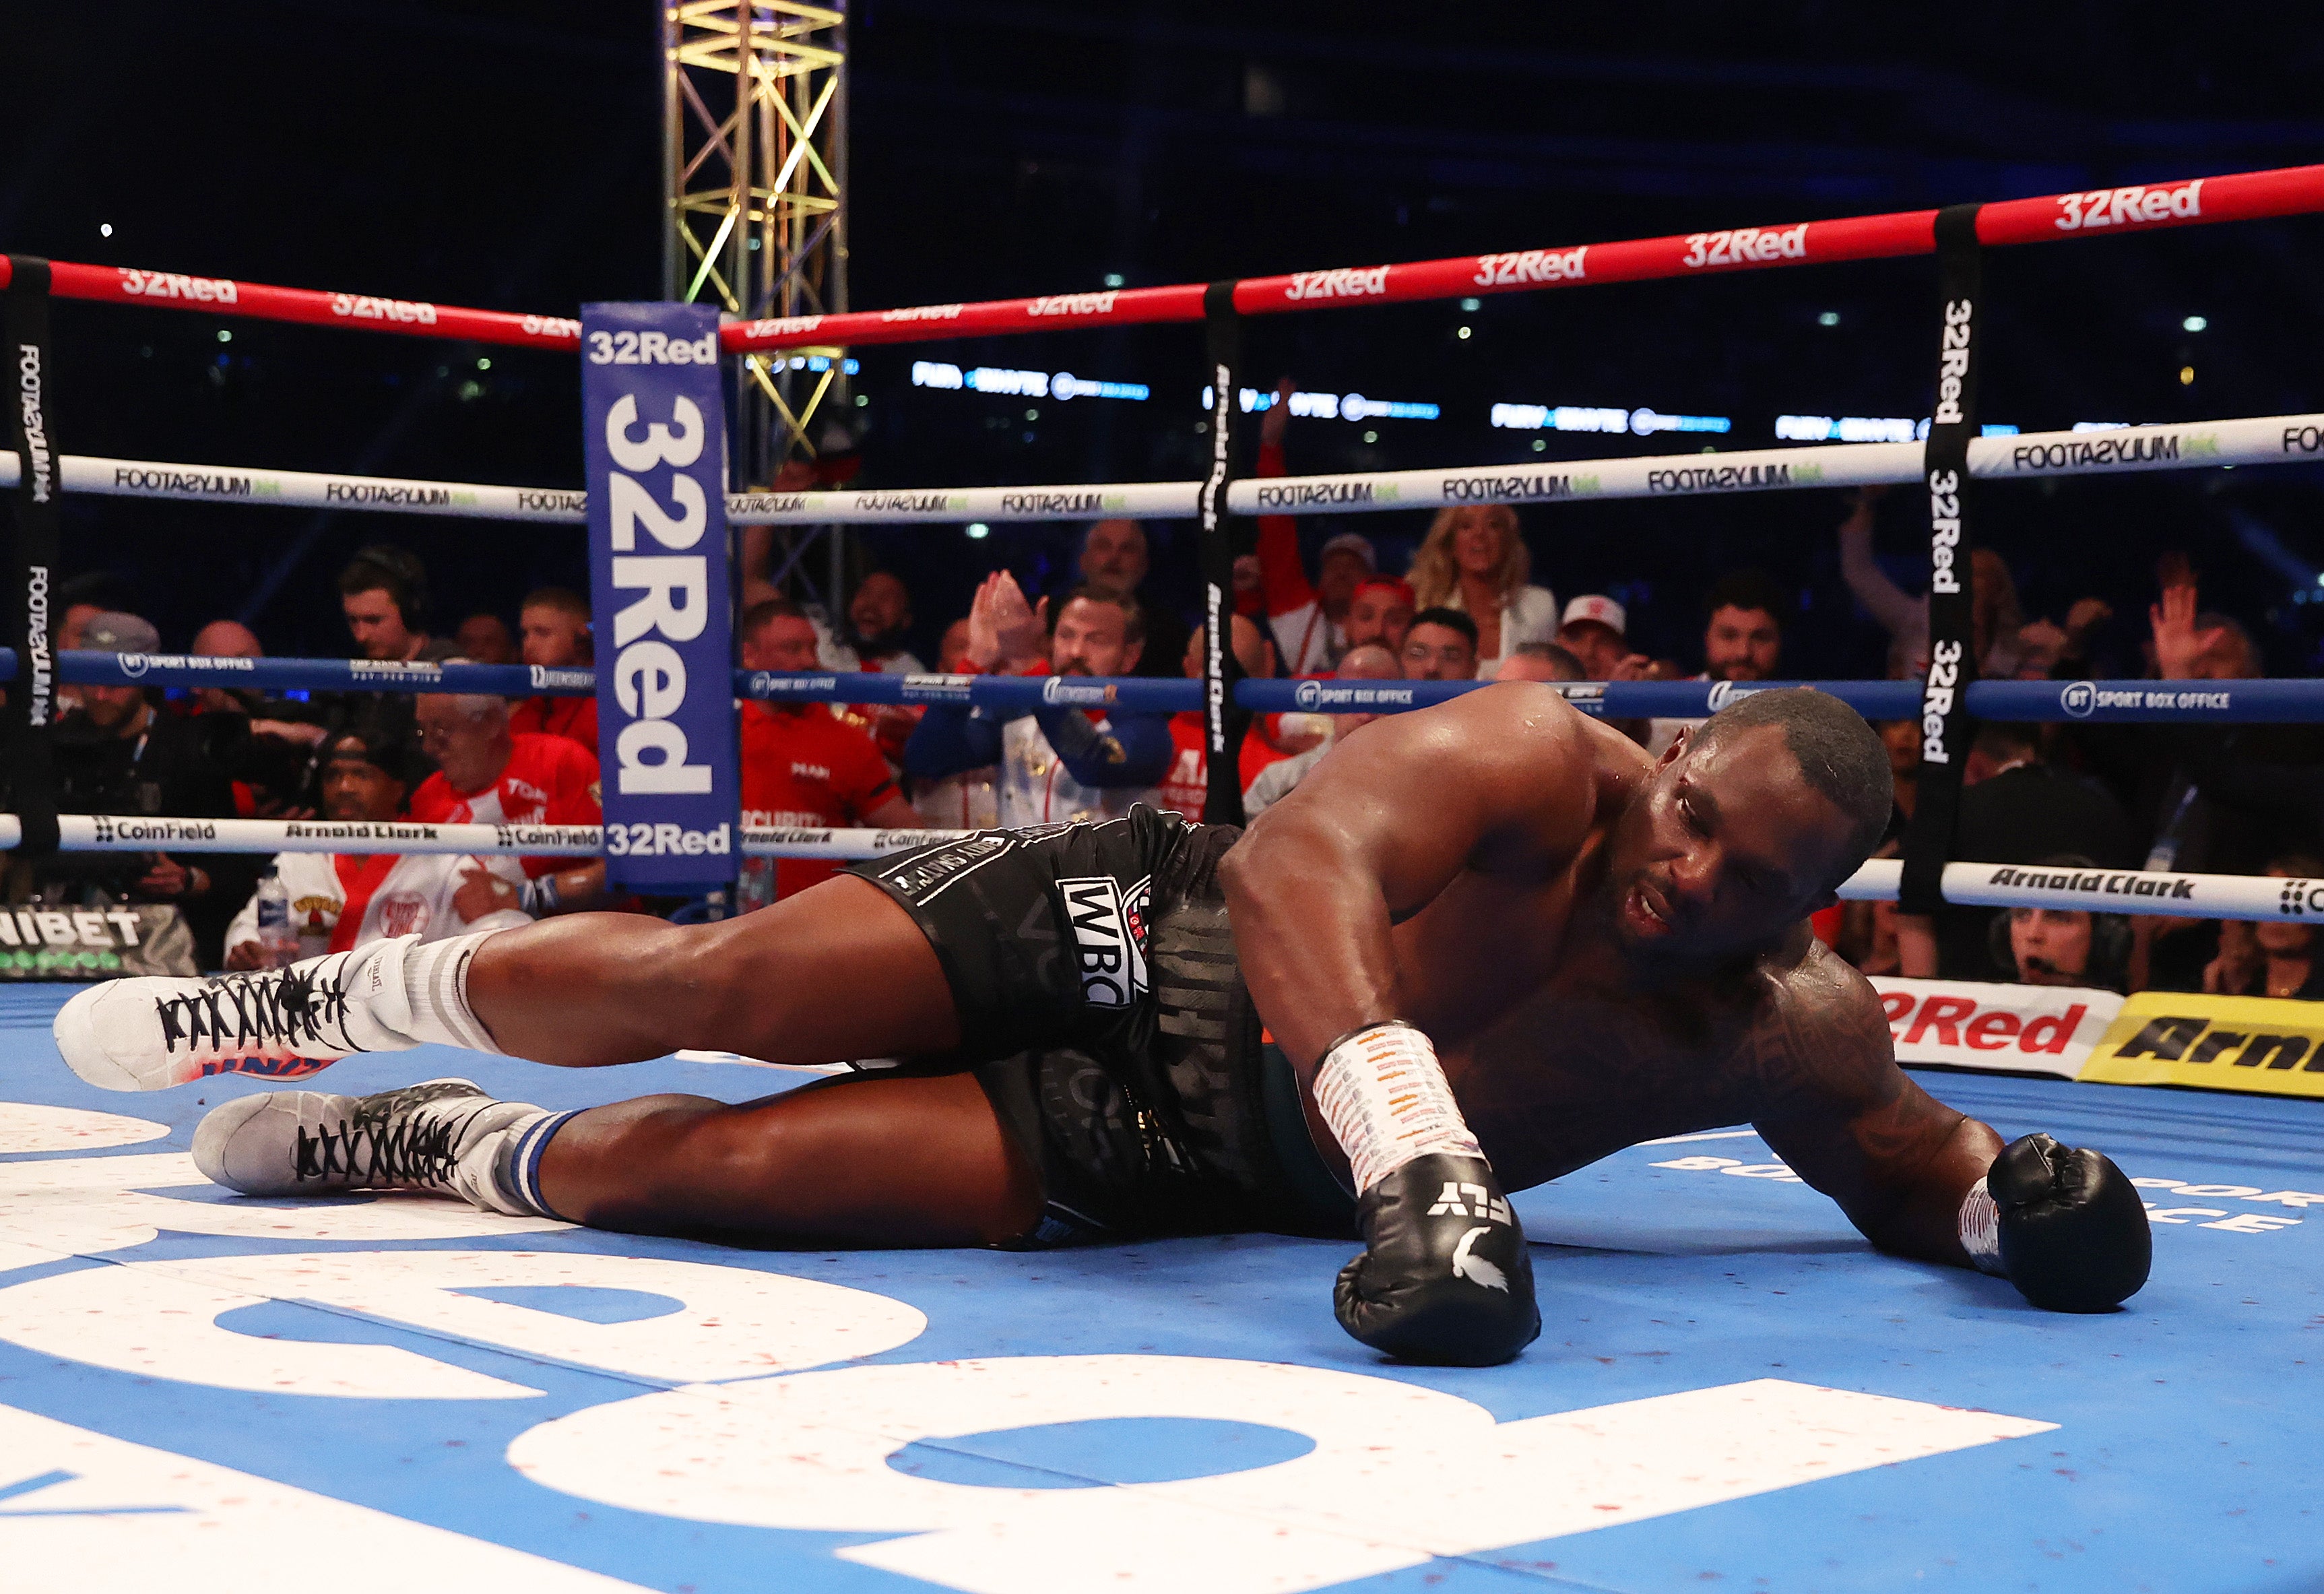 Dillian Whyte was stopped by Tyson Fury in Round 6 at Wembley Stadium